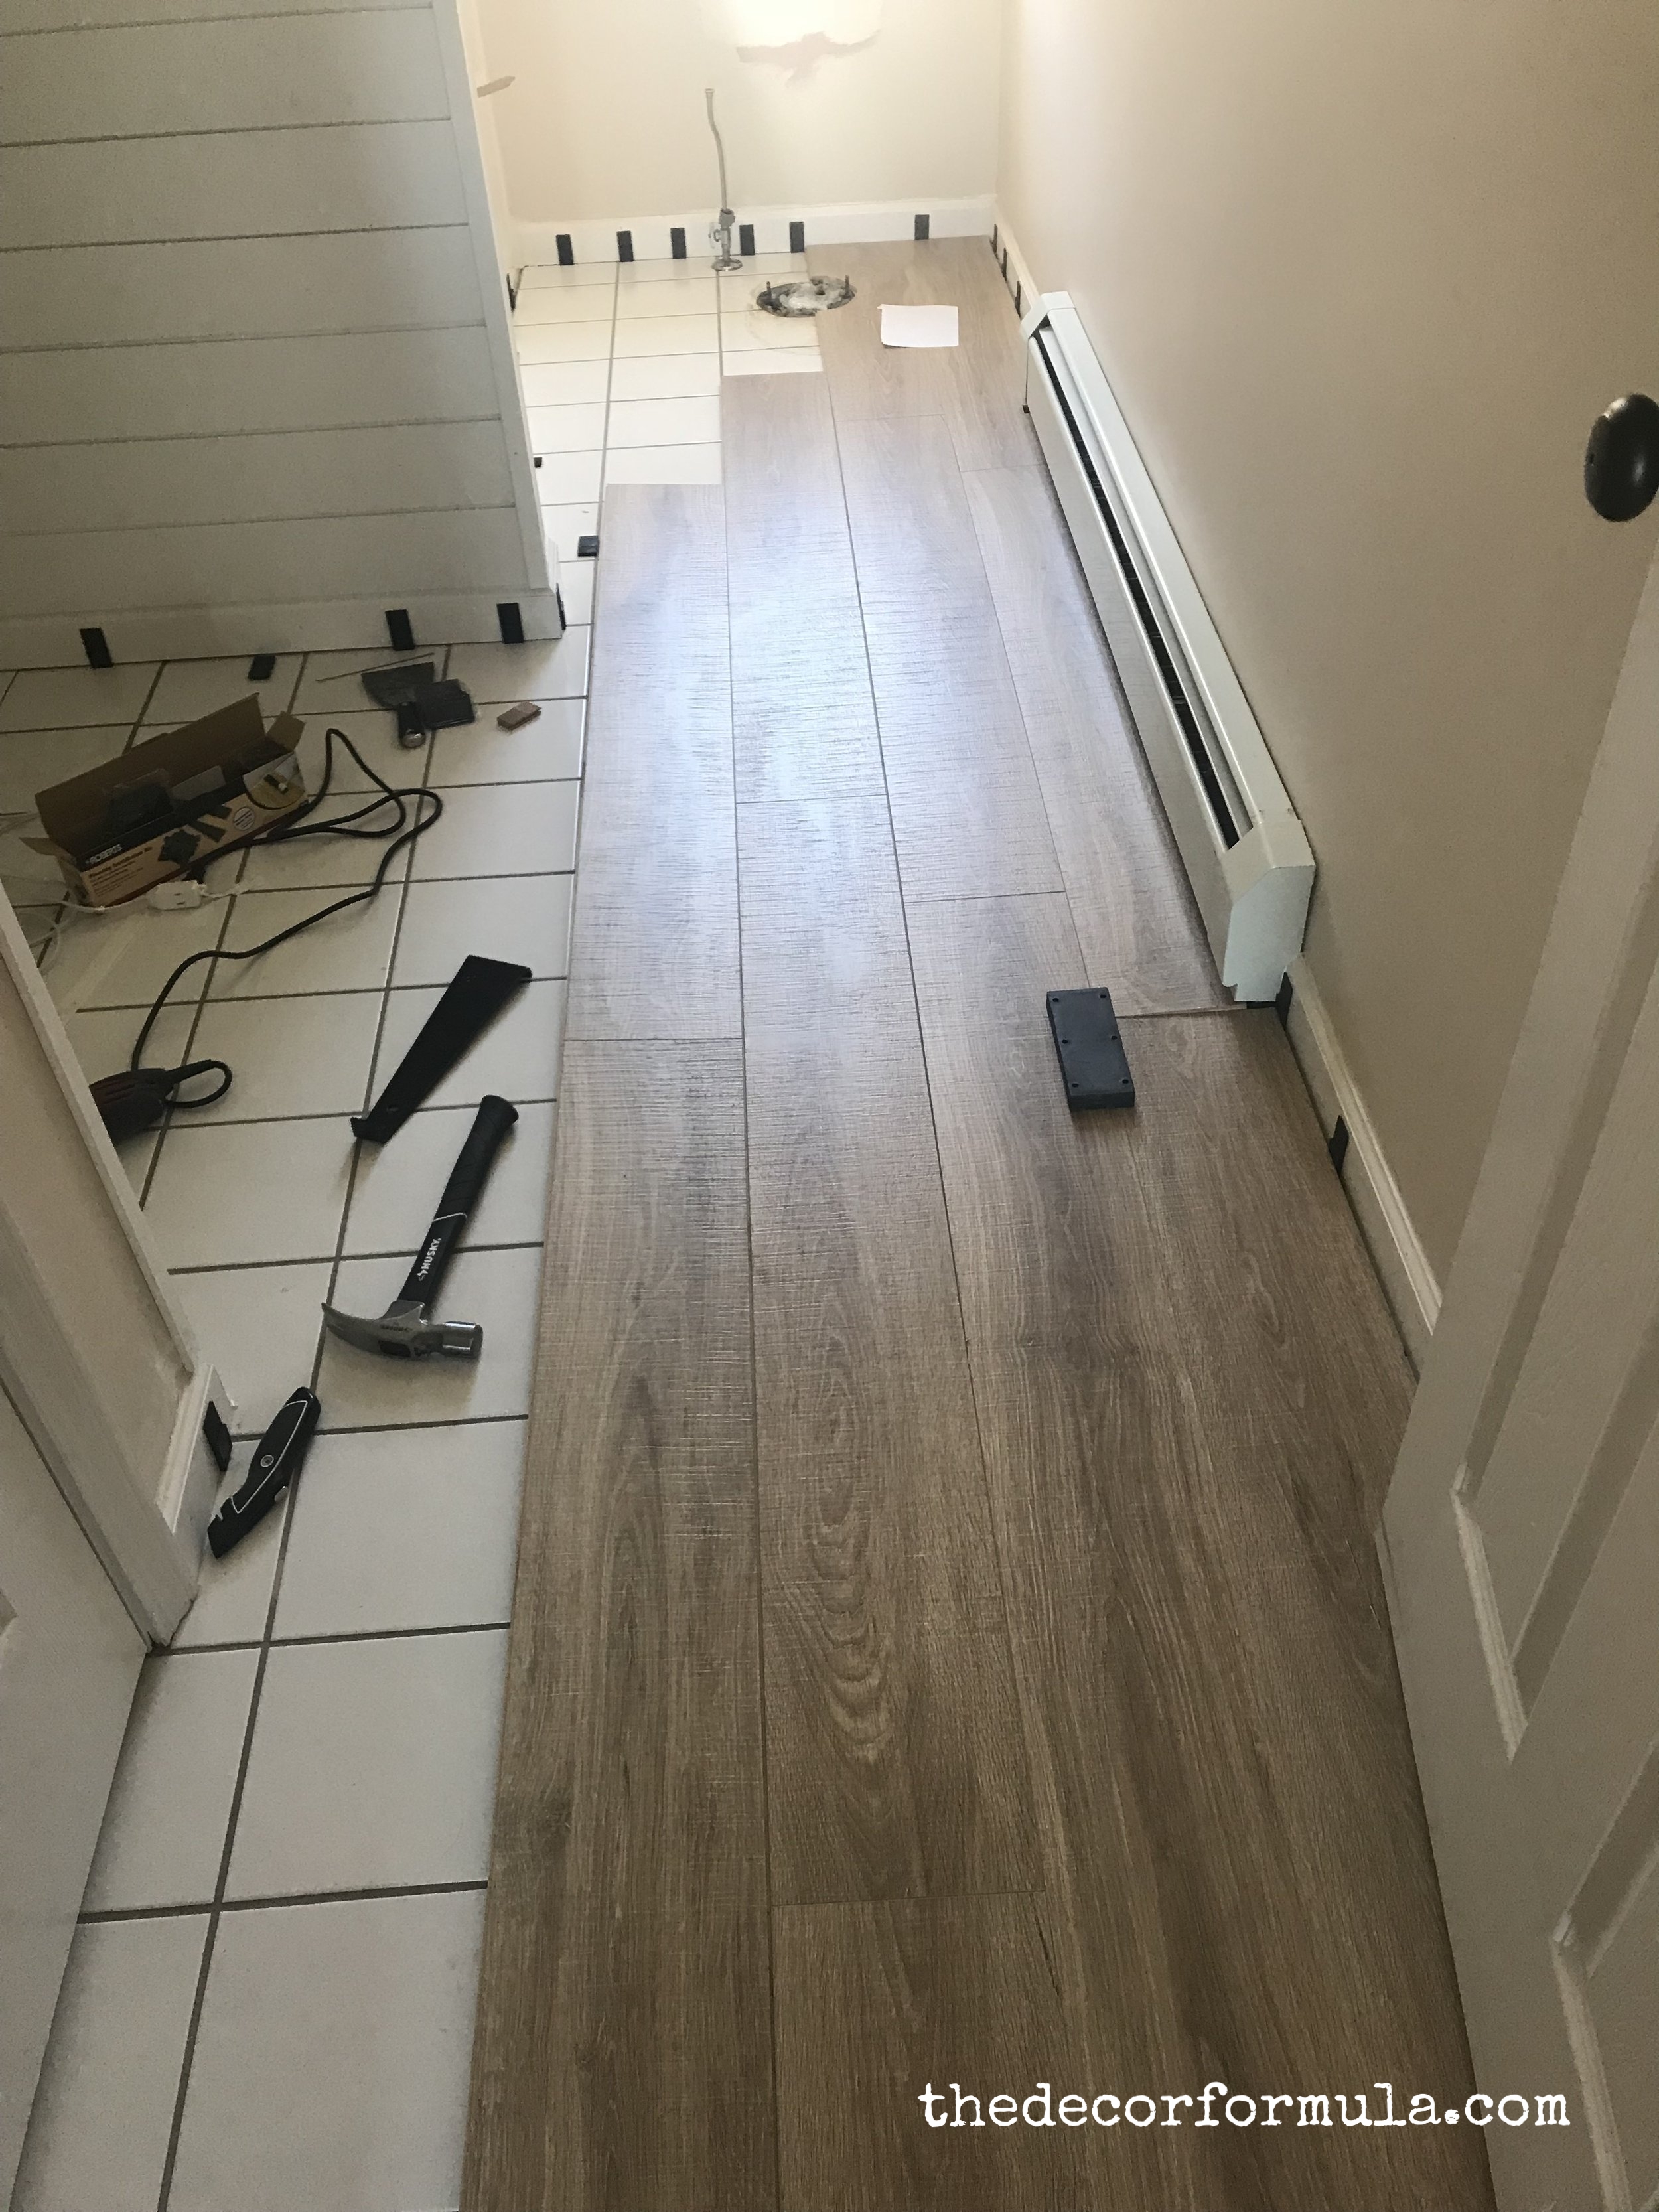 Ideas For Covering Up Tile Floors, Can Laminate Floor Be Installed Over Ceramic Tile